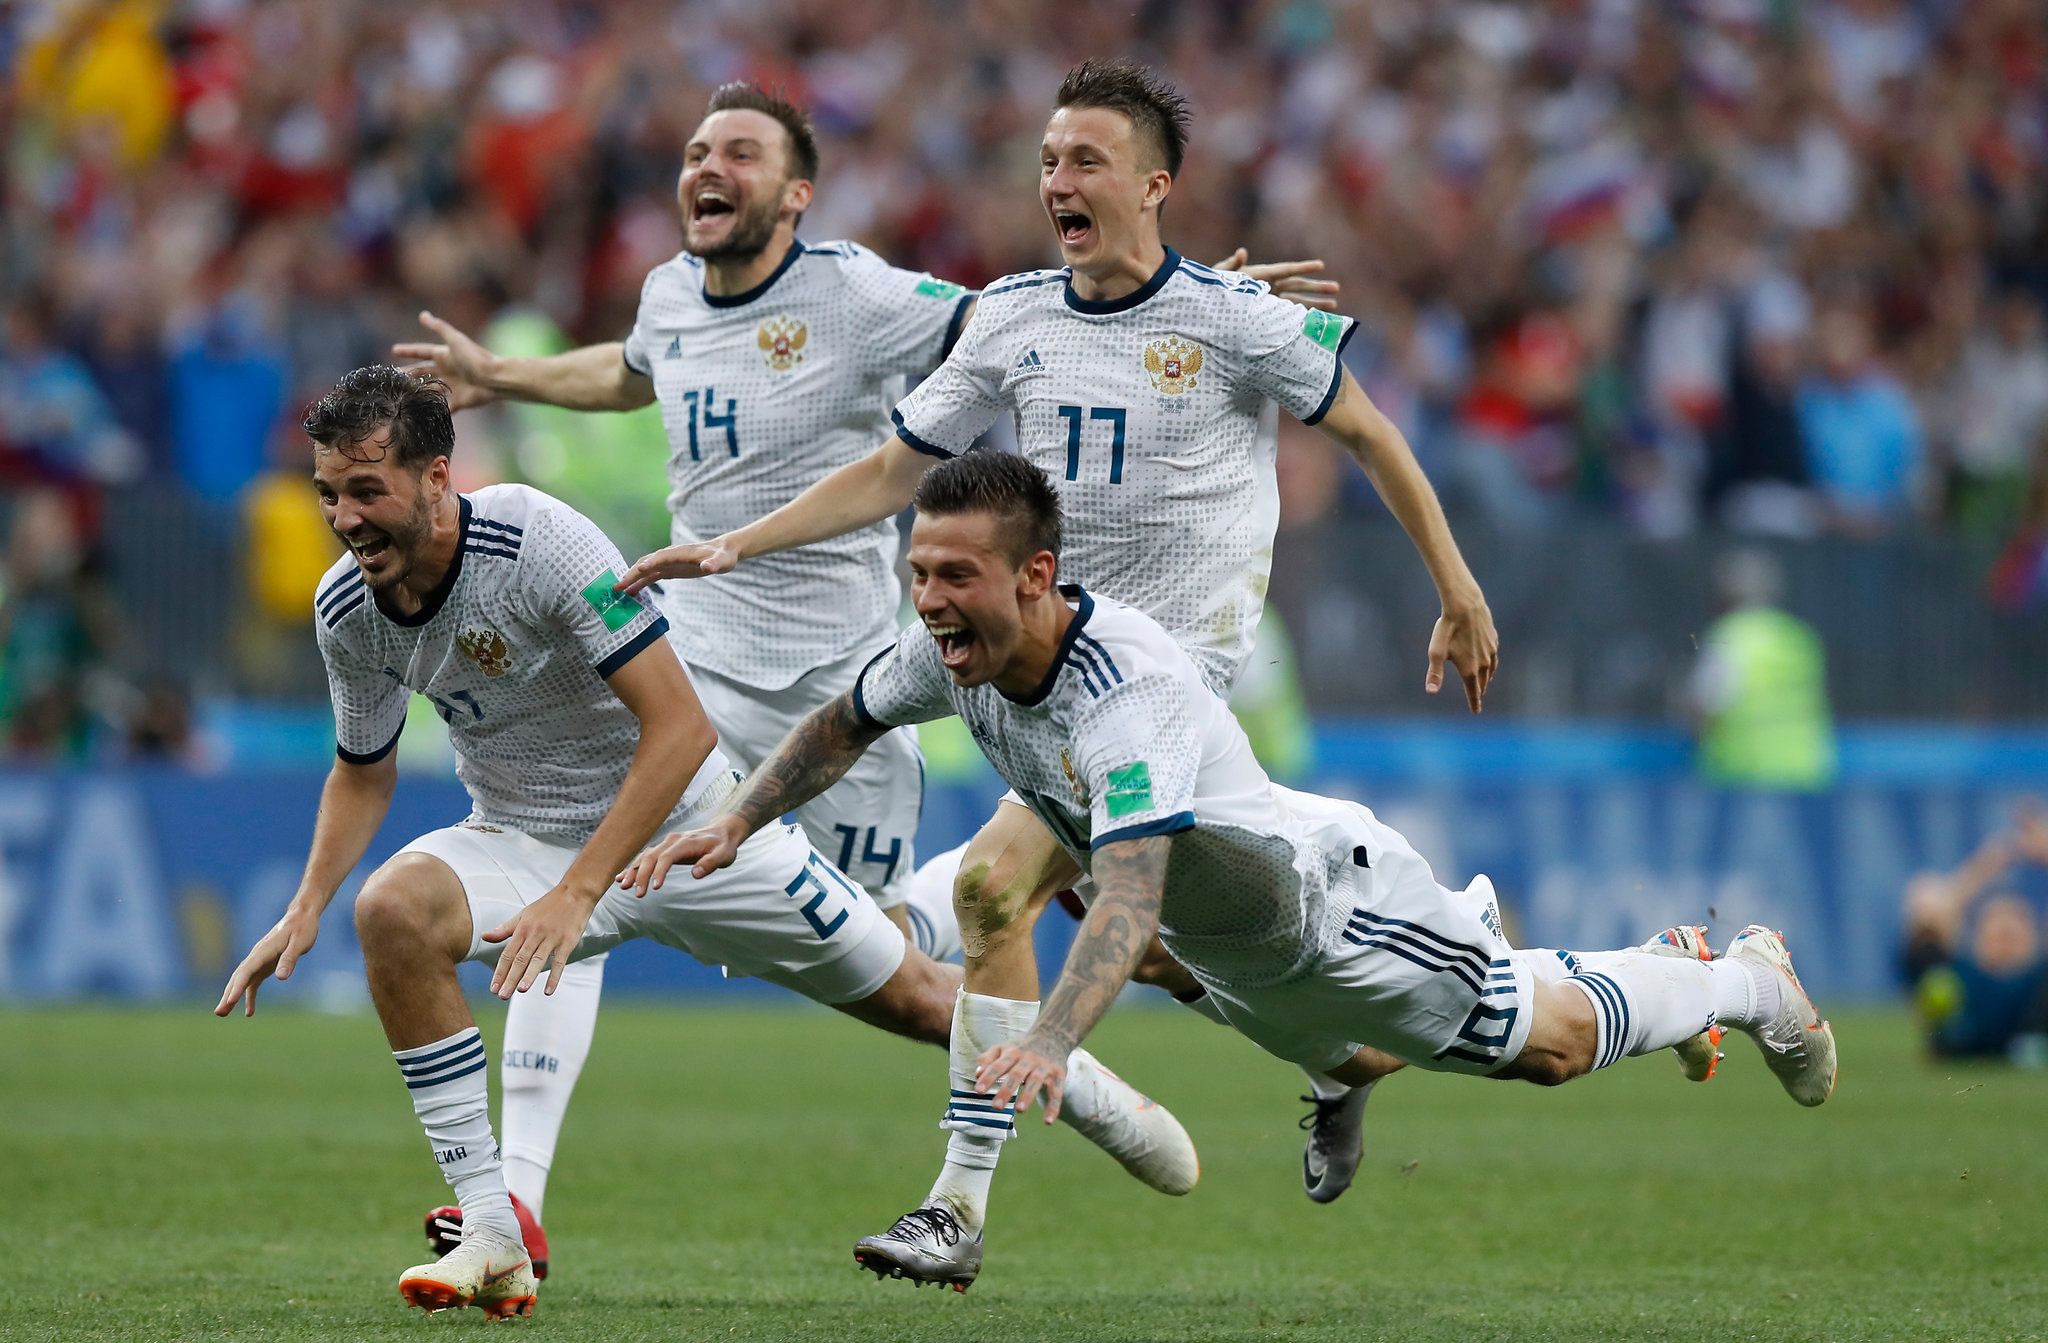 That Roar You Heard Was From Russia. Its Team Sent Spain Packing